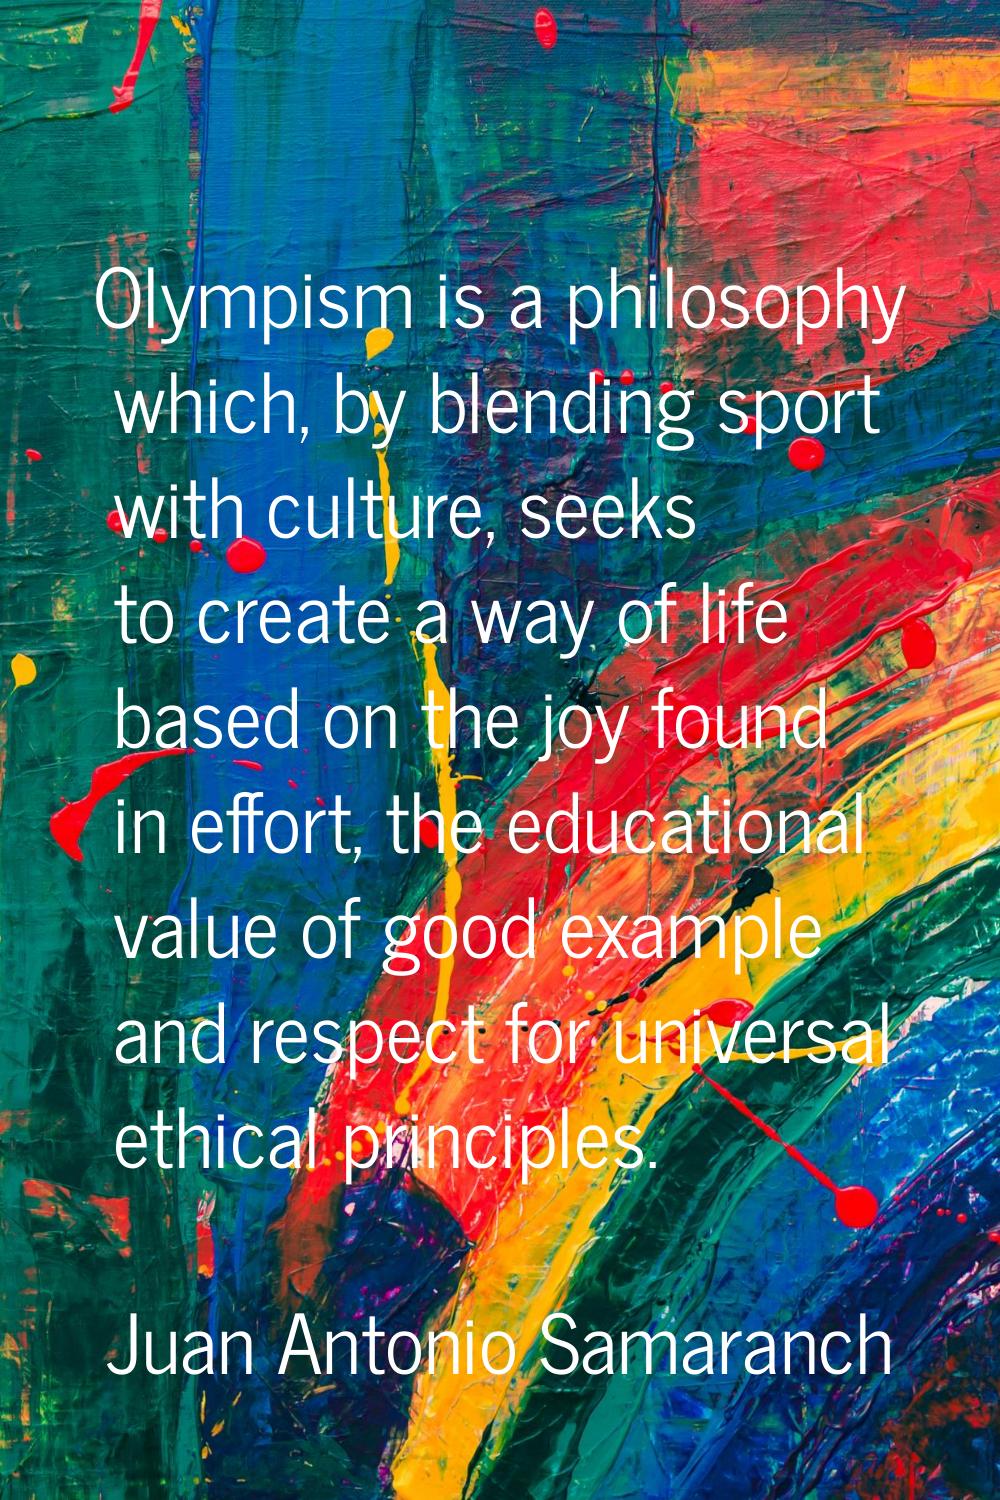 Olympism is a philosophy which, by blending sport with culture, seeks to create a way of life based